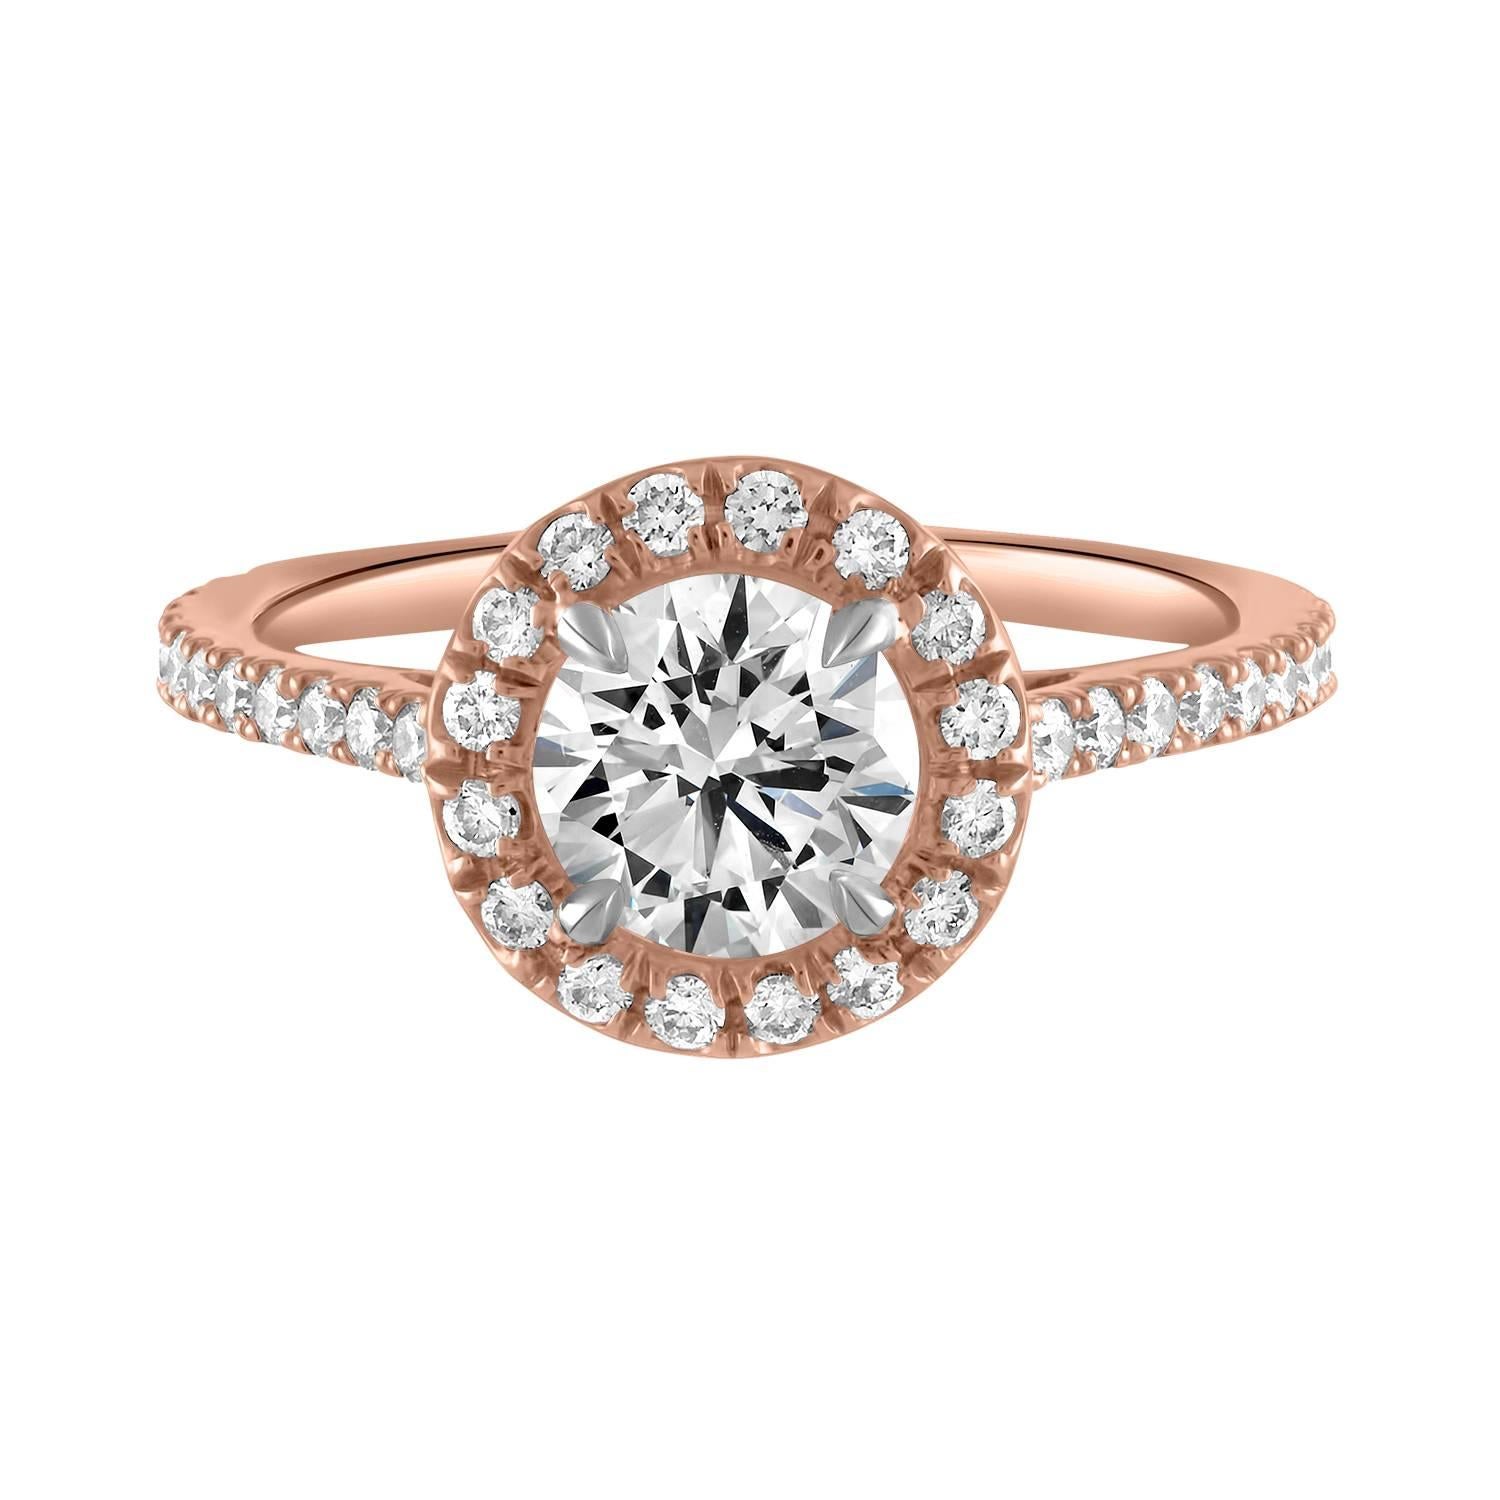 Handmade 18k Rose Gold & 0.90ct GIA Certified Diamond Surround Engagement Ring For Sale